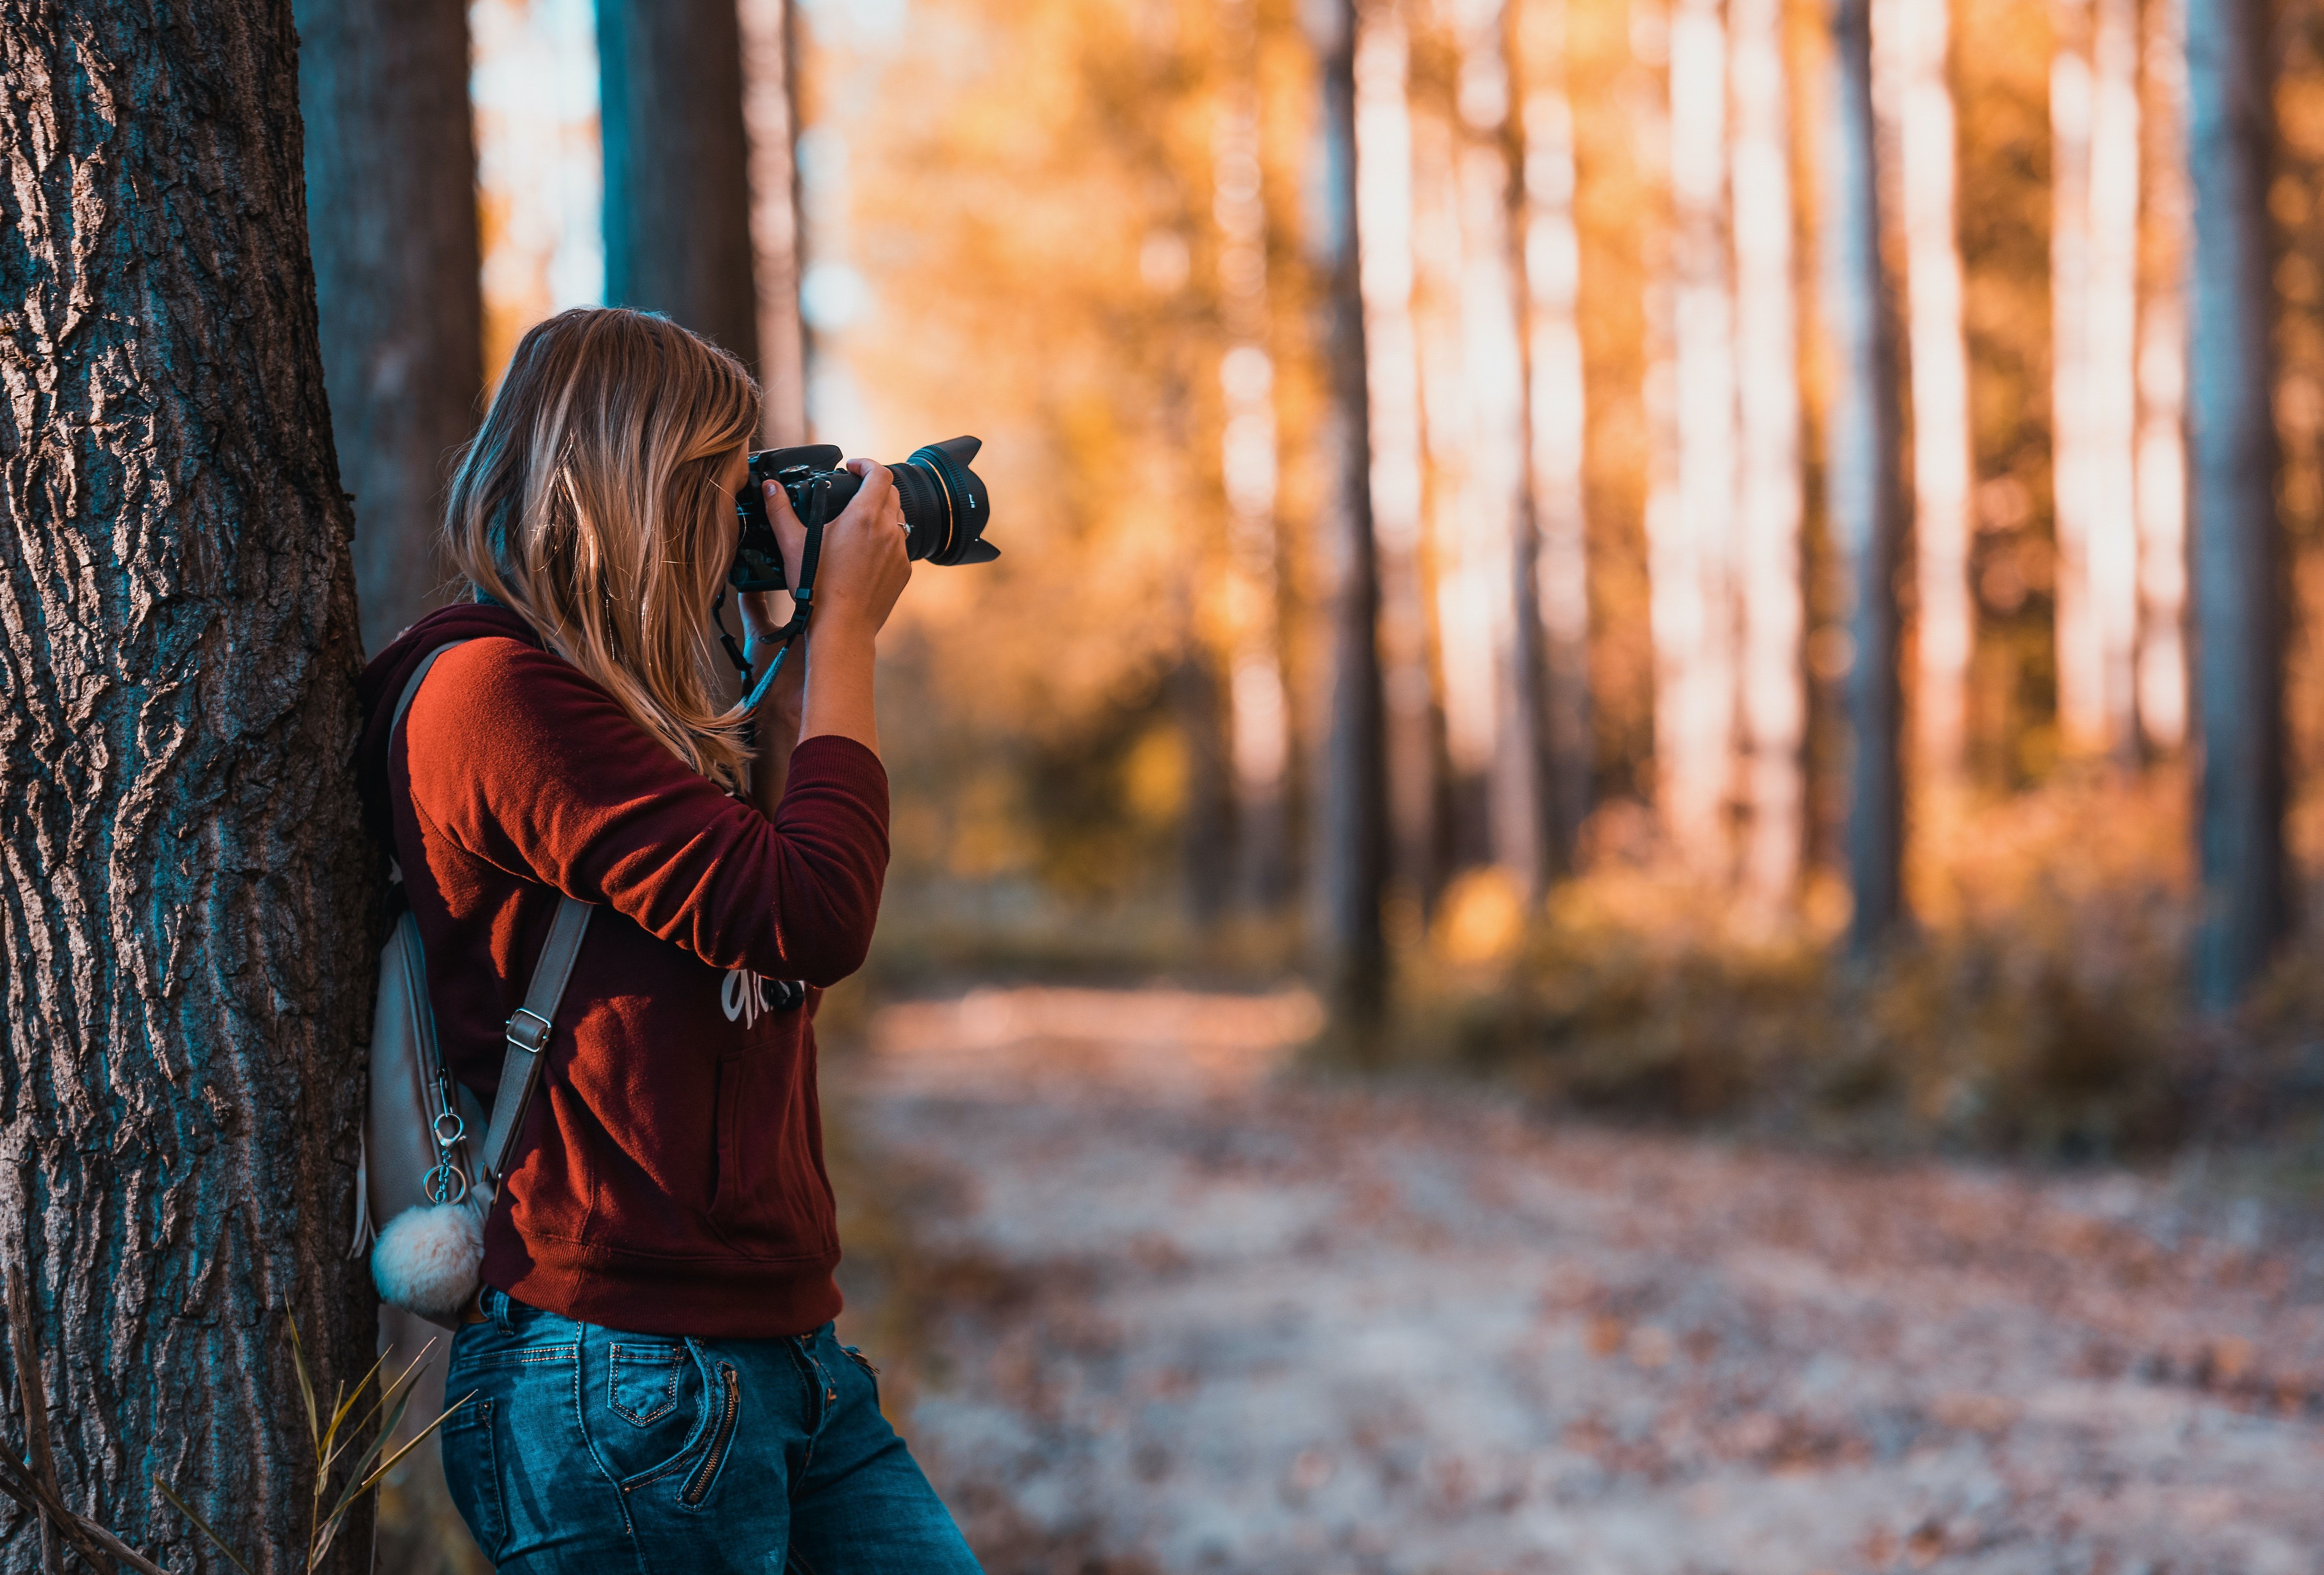 Woman Leaning Back on Tree Trunk Using Black Dslr Camera during